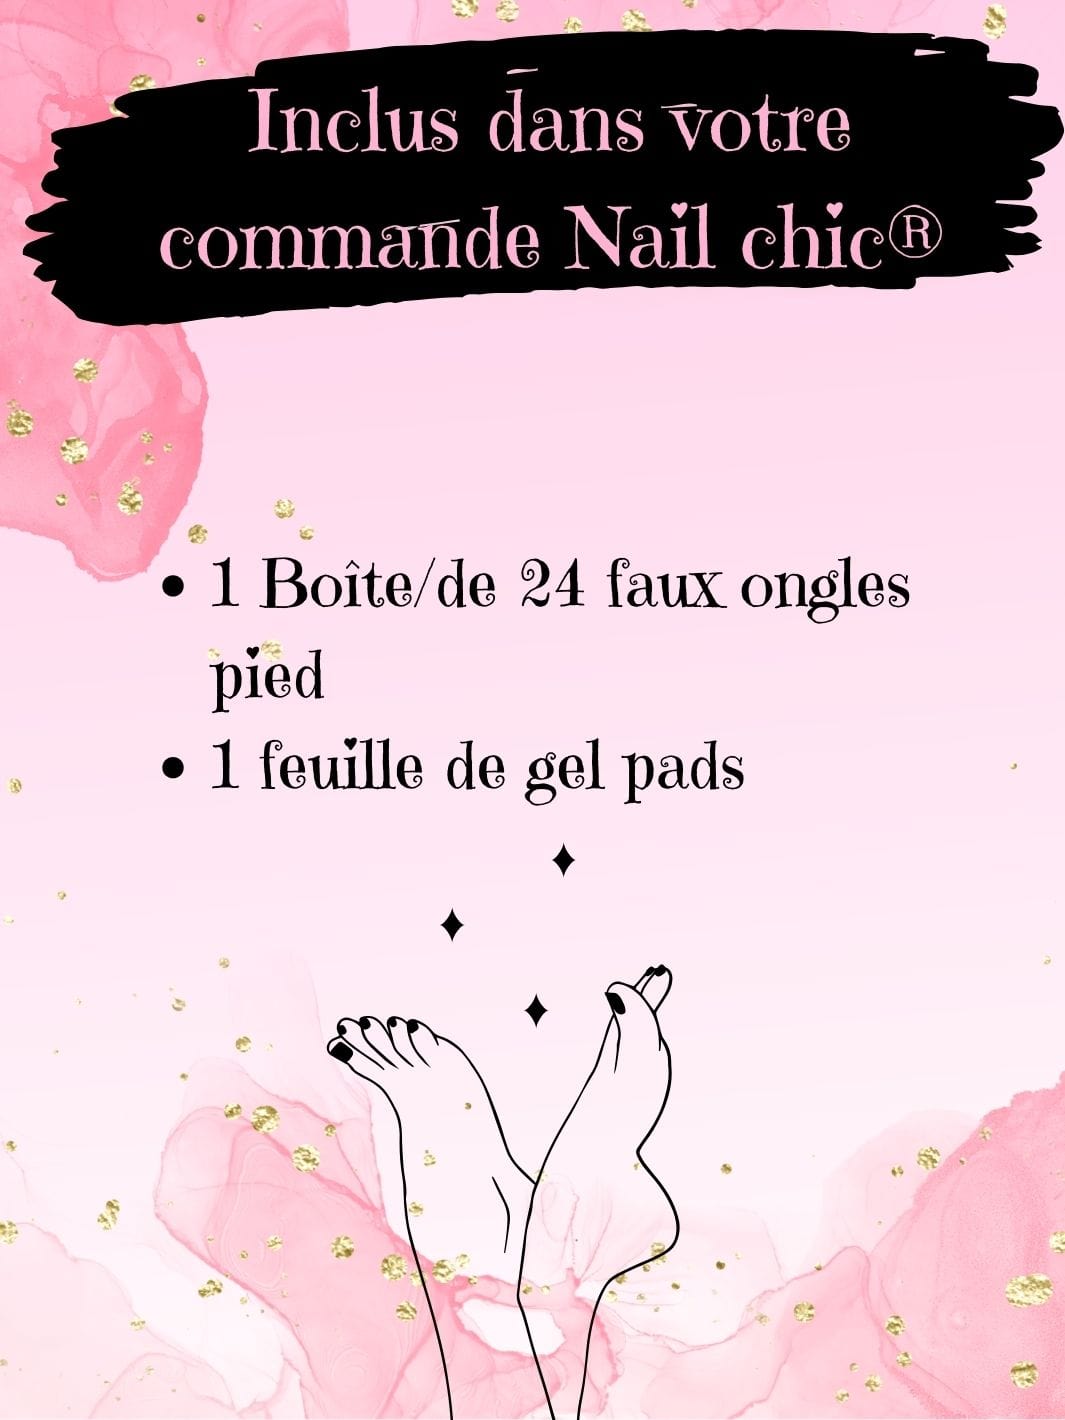 Faux ongles pieds french Nail Chic